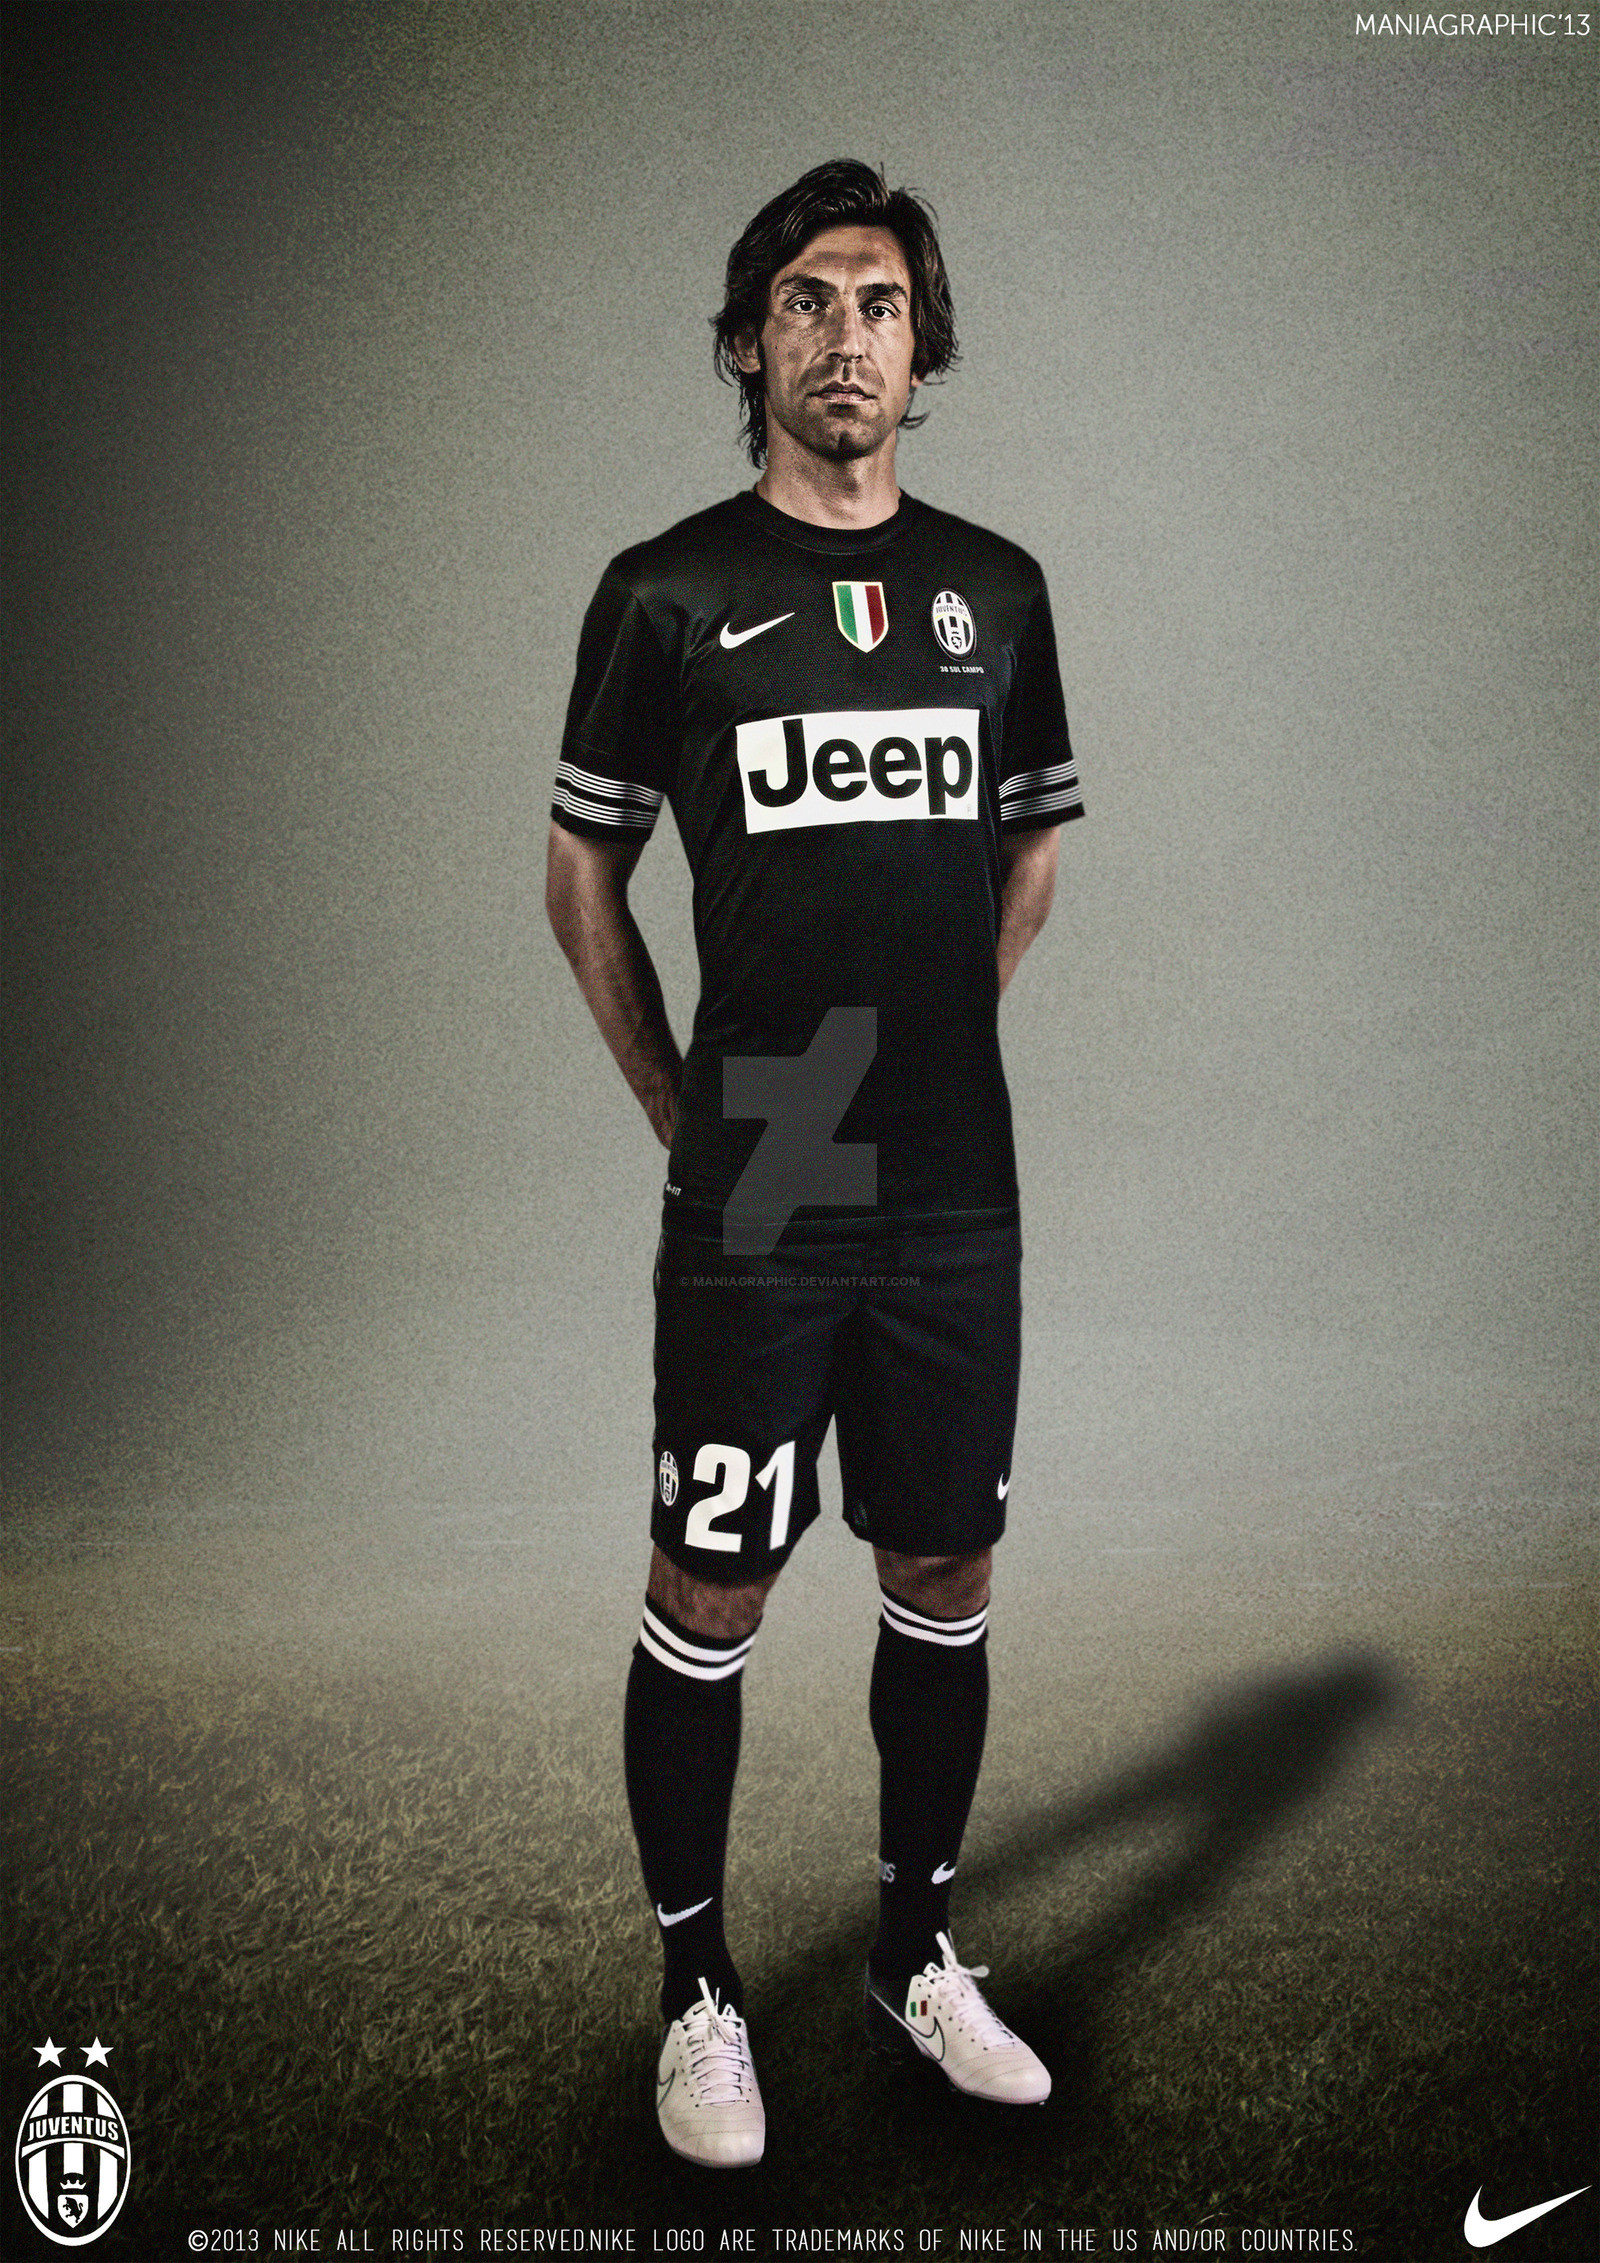 1600x2263 Andrea Pirlo Poster by ManiaGraphic Andrea Pirlo Poster by ManiaGraphic